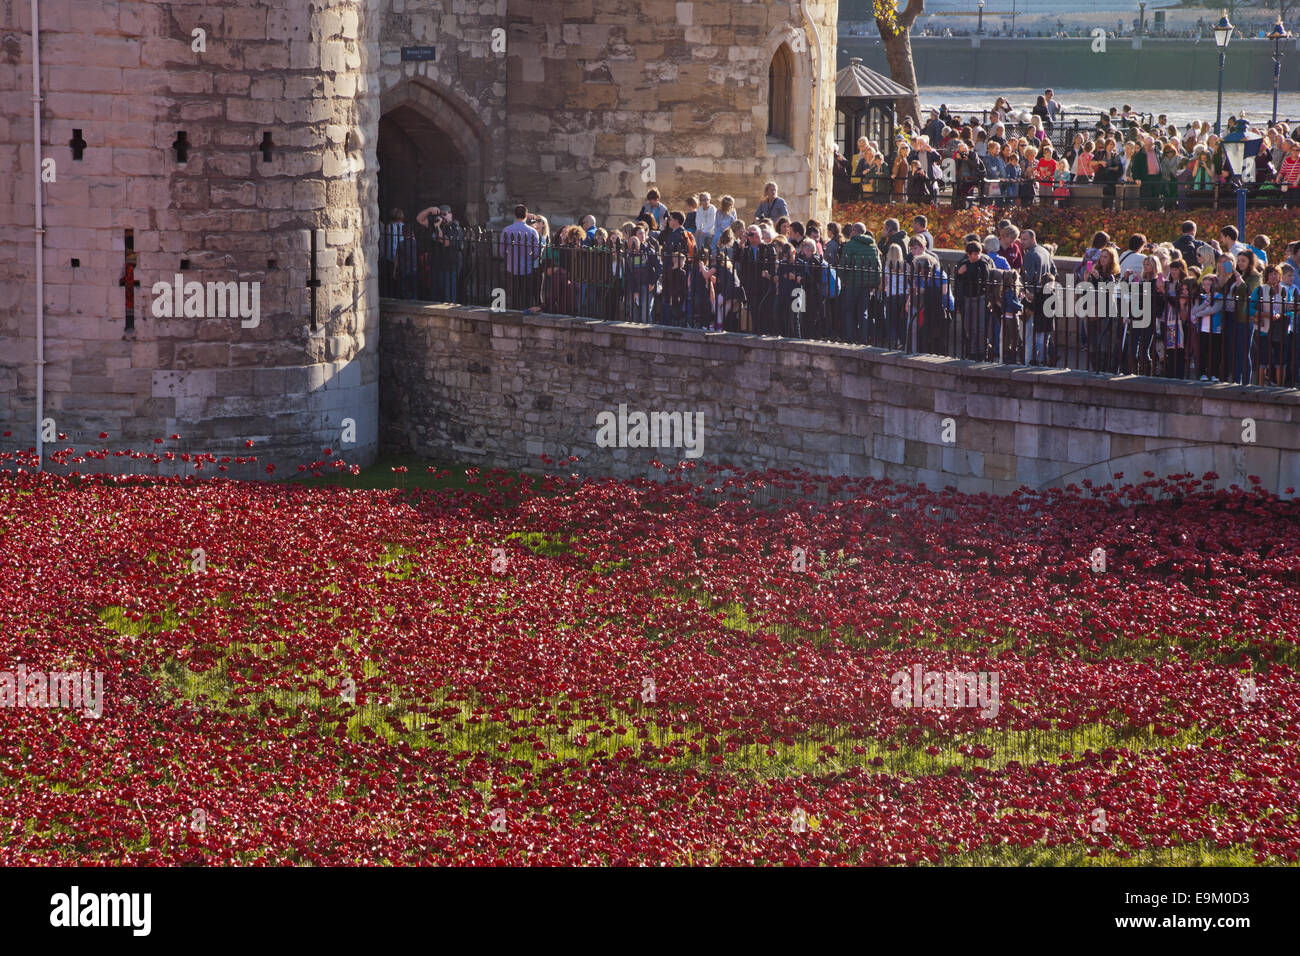 The poppies work of art outside the Tower of London, London UK with crowds of sightseers looking on. Stock Photo